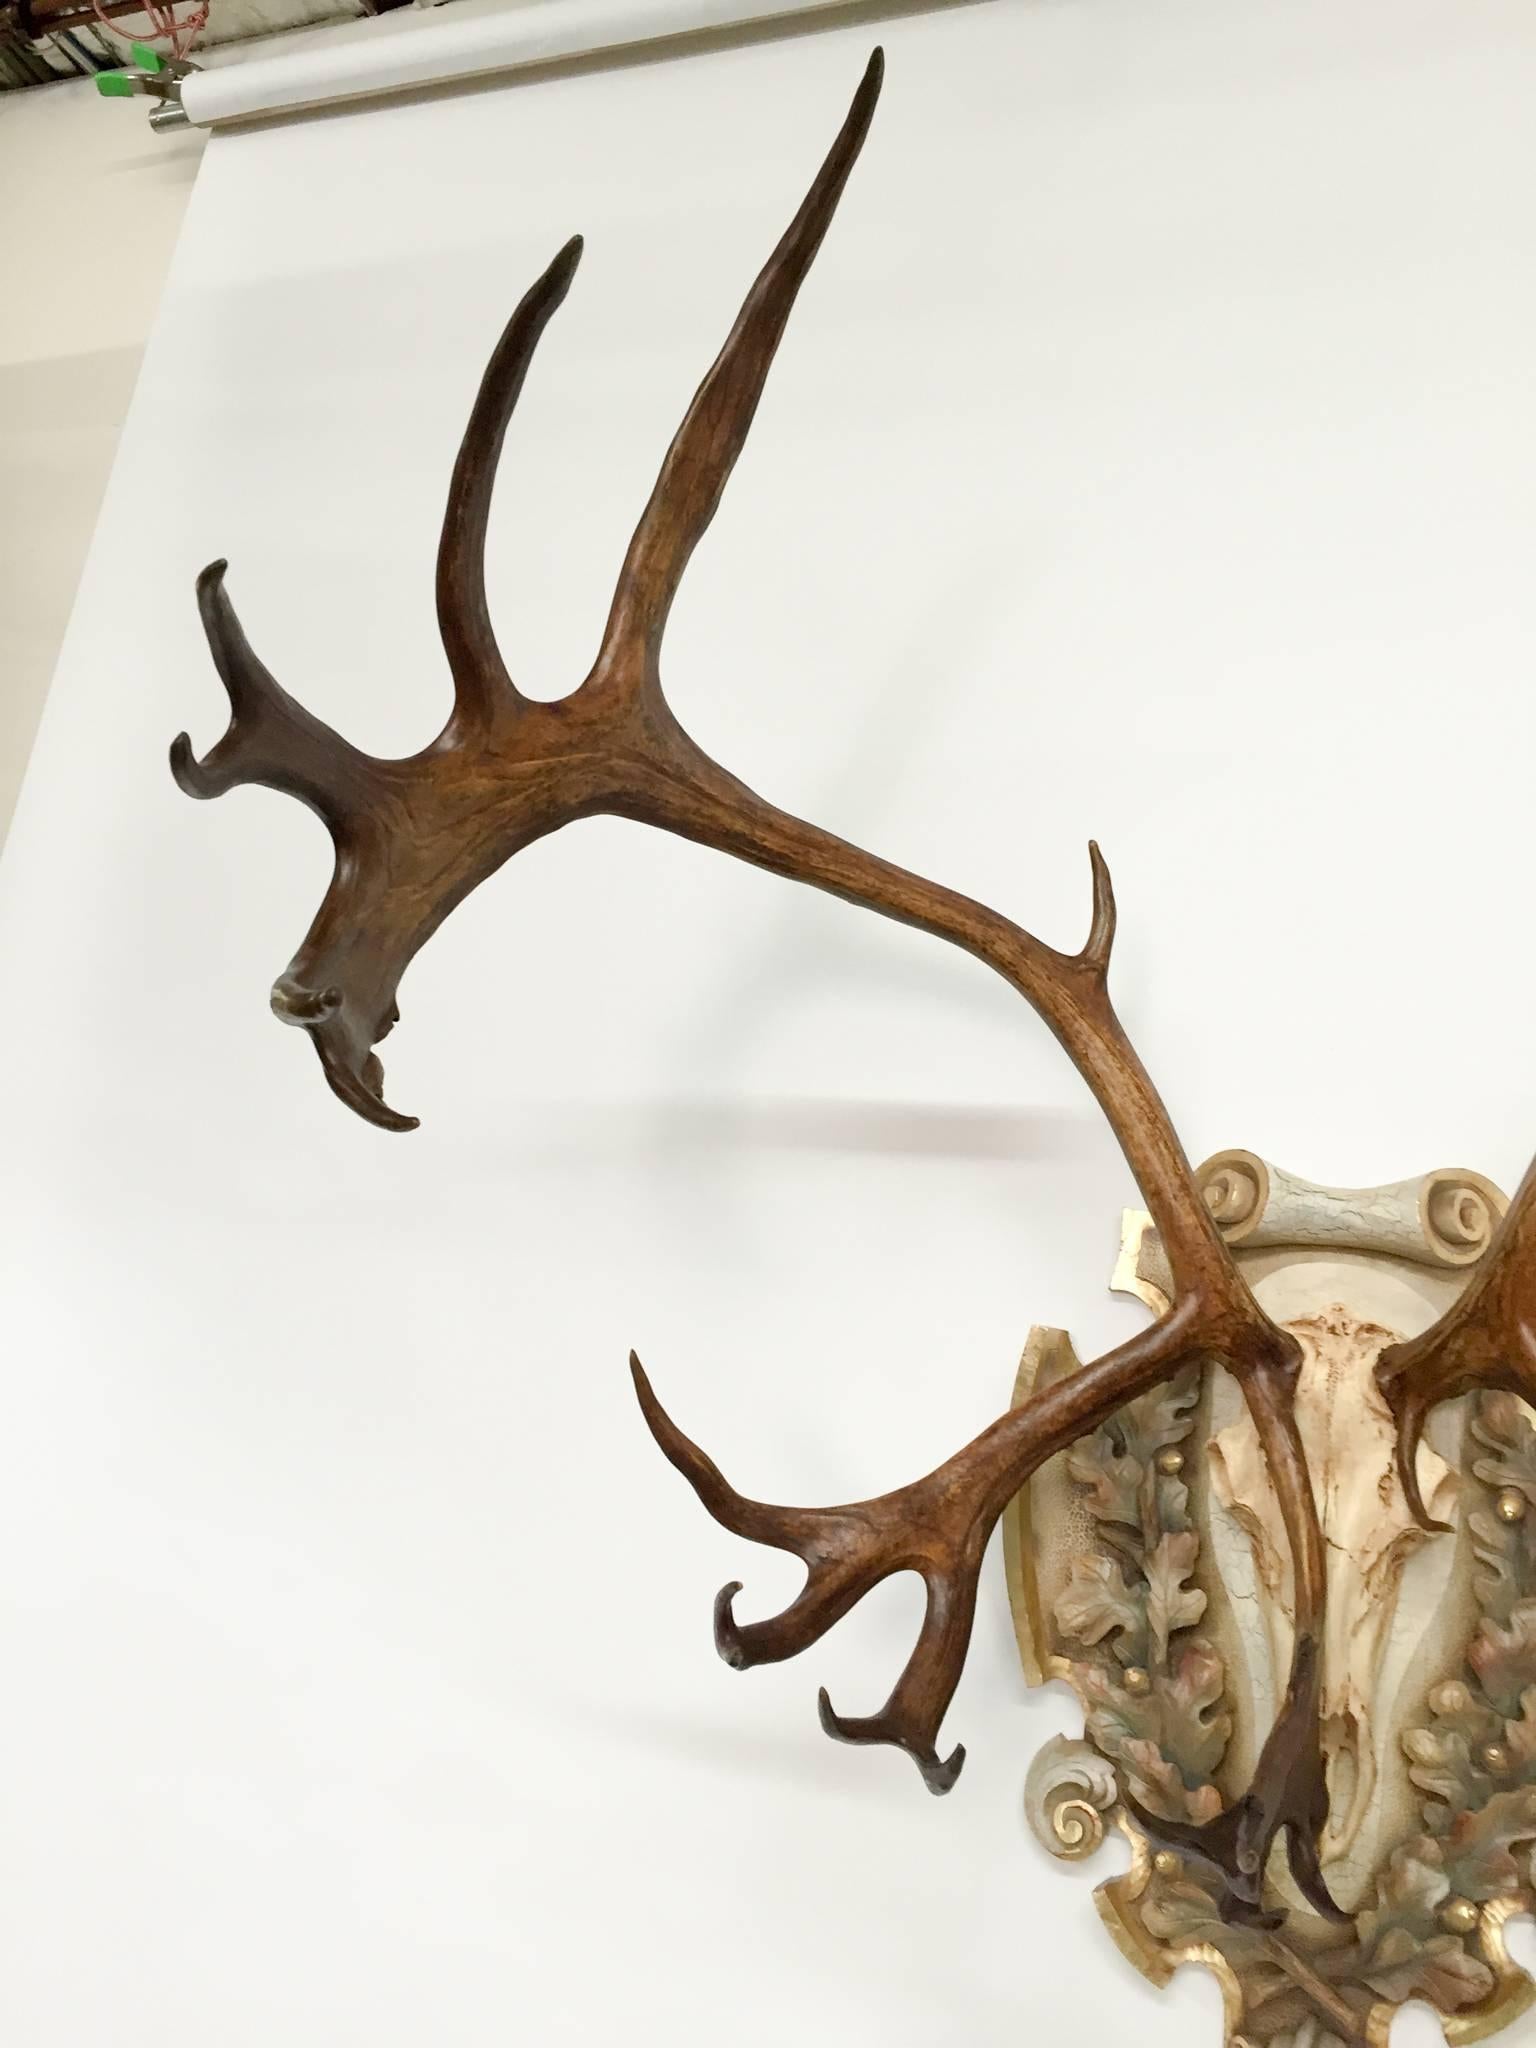 Vintage Alaskan Caribou on hand-carved linden wood and Italian painted polychrome plaque. A most impressive and magnificent piece in person.  Noted for the impressively large 